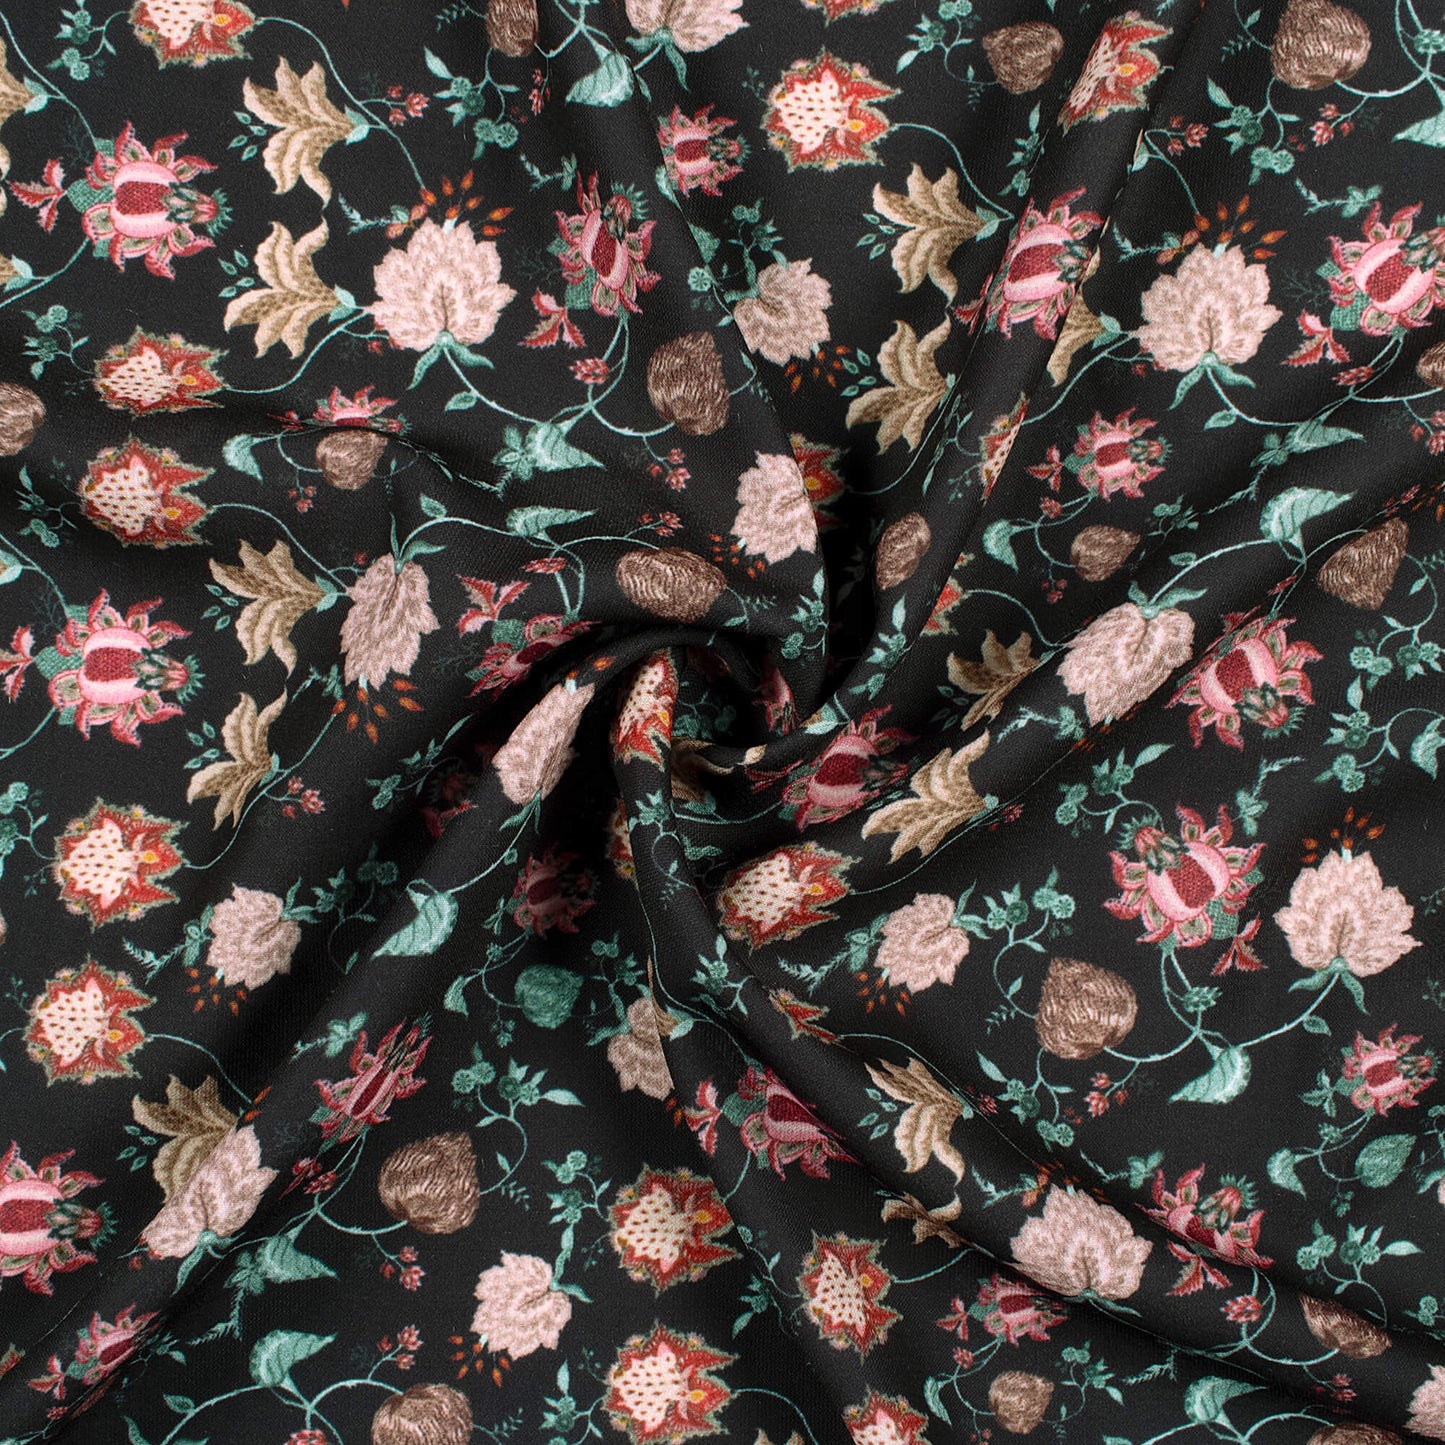 Black And Pink Floral Pattern Digital Print BSY Crepe Fabric